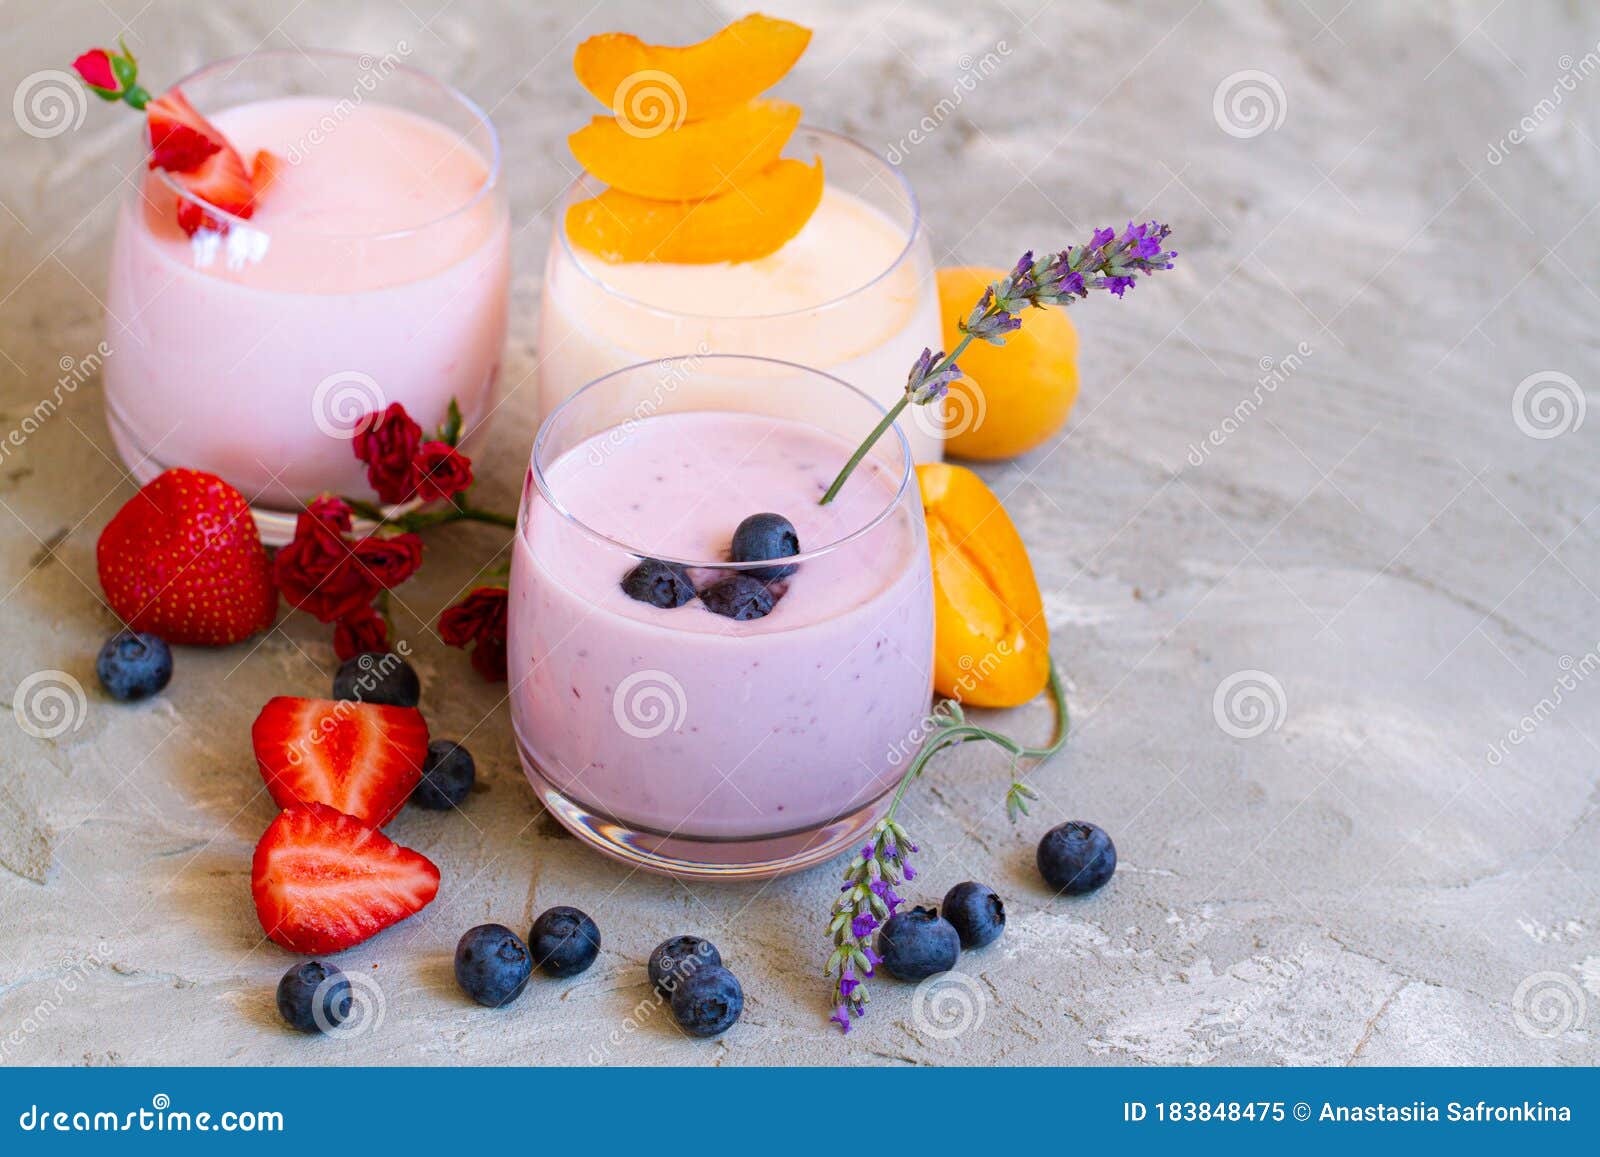 strawberry, blueberry smoothie on light background. well being and weight loos concept. milkshake with fresh berries. healthy